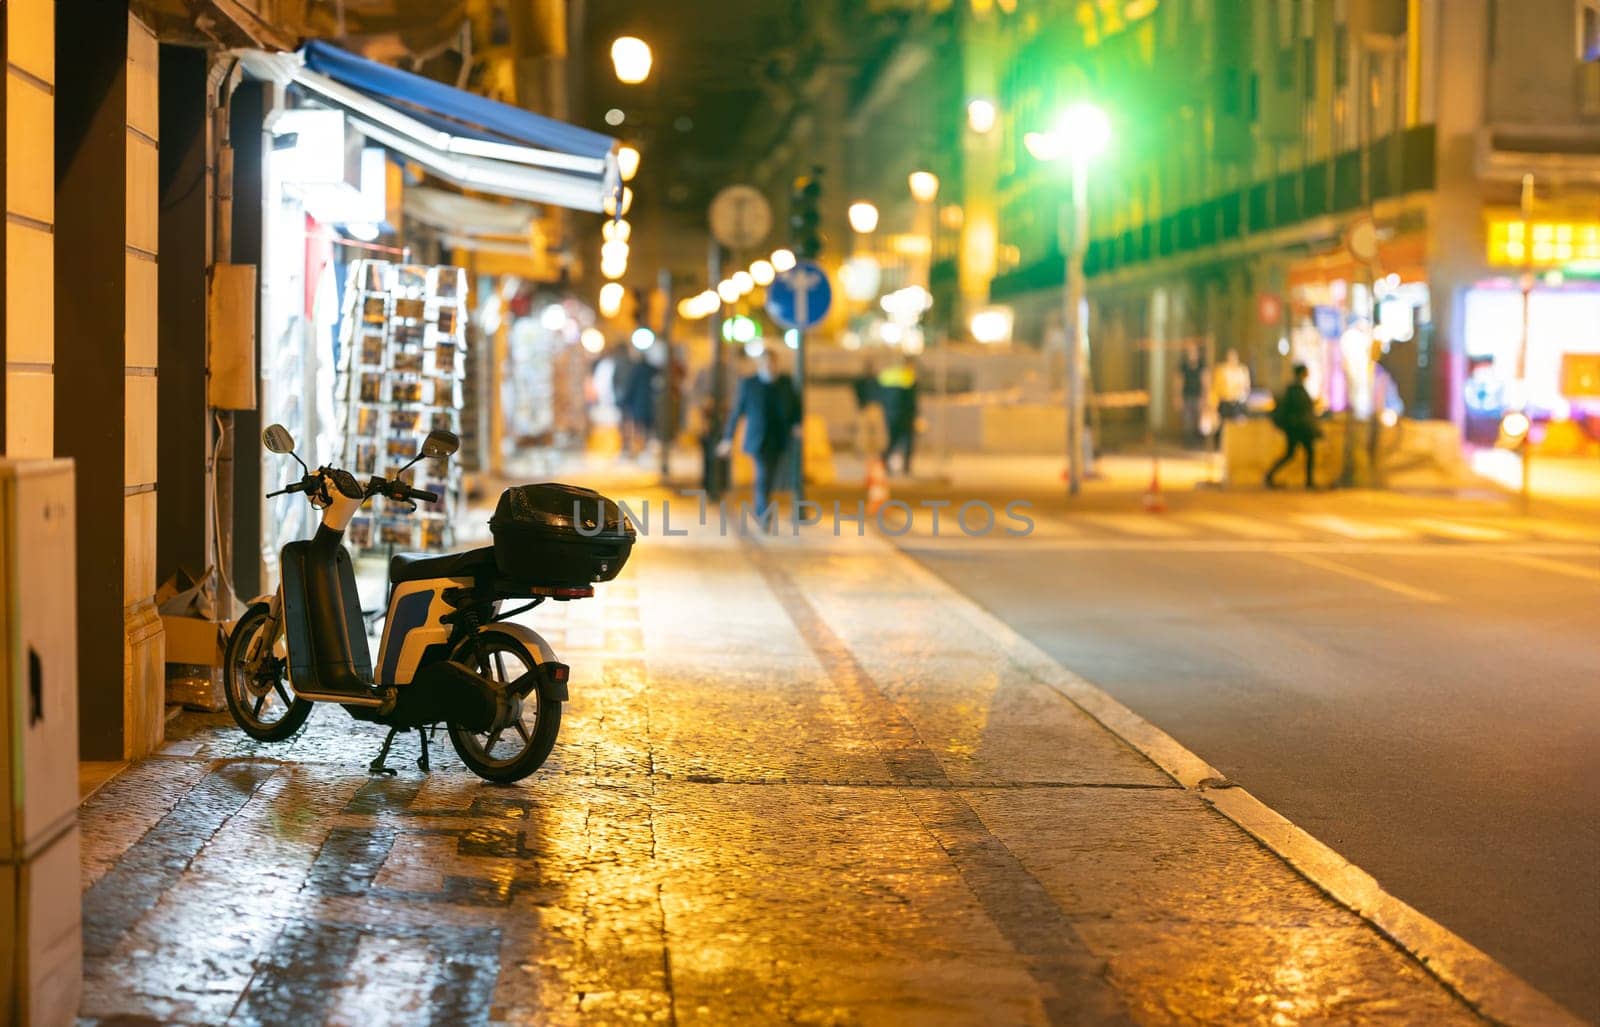 A motor scooter parked on the night street - copy space